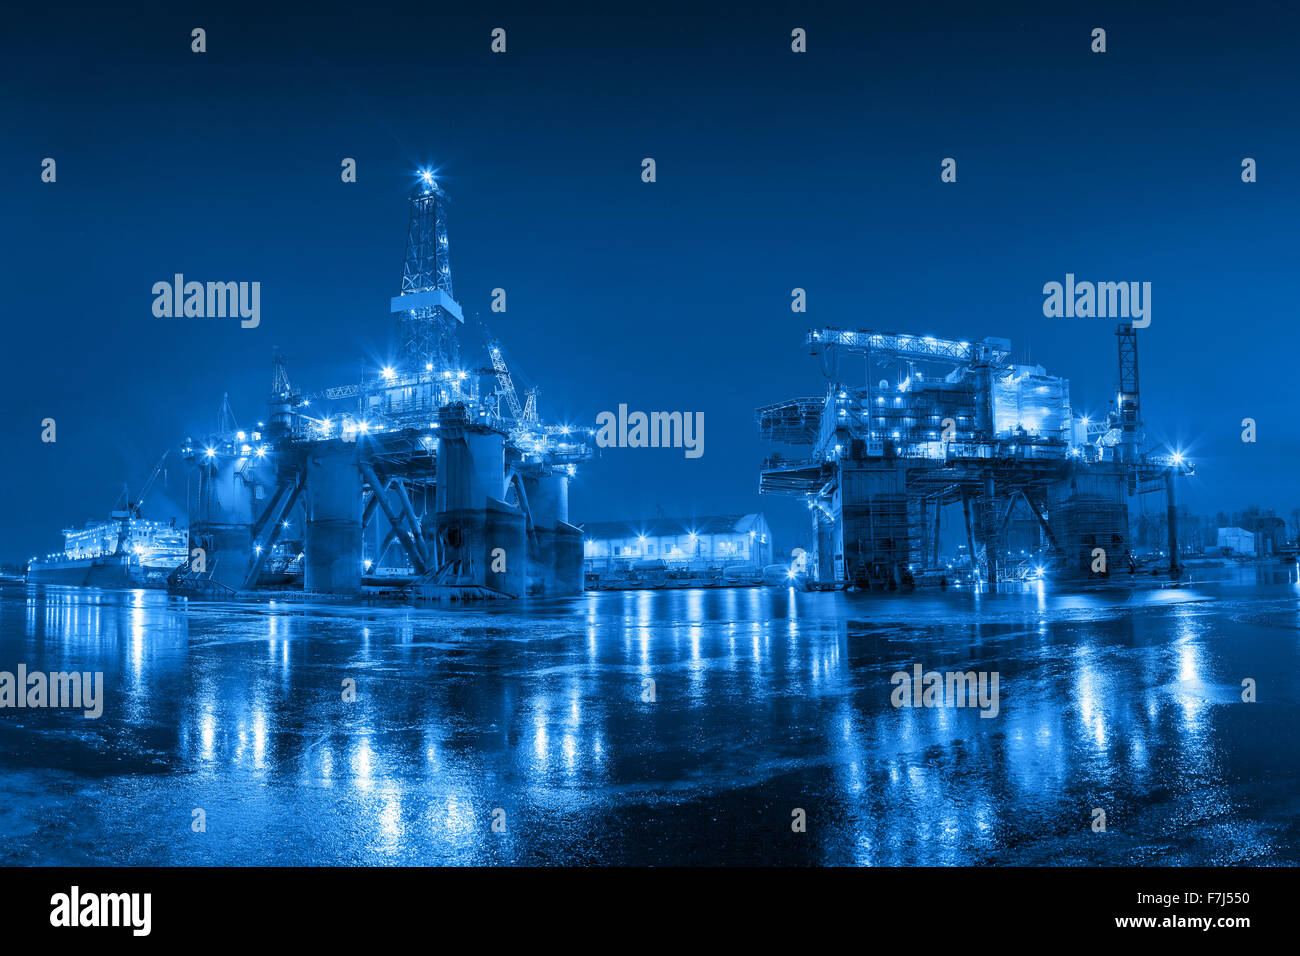 Oil Rig at night in Shipyard - industry concept. Stock Photo